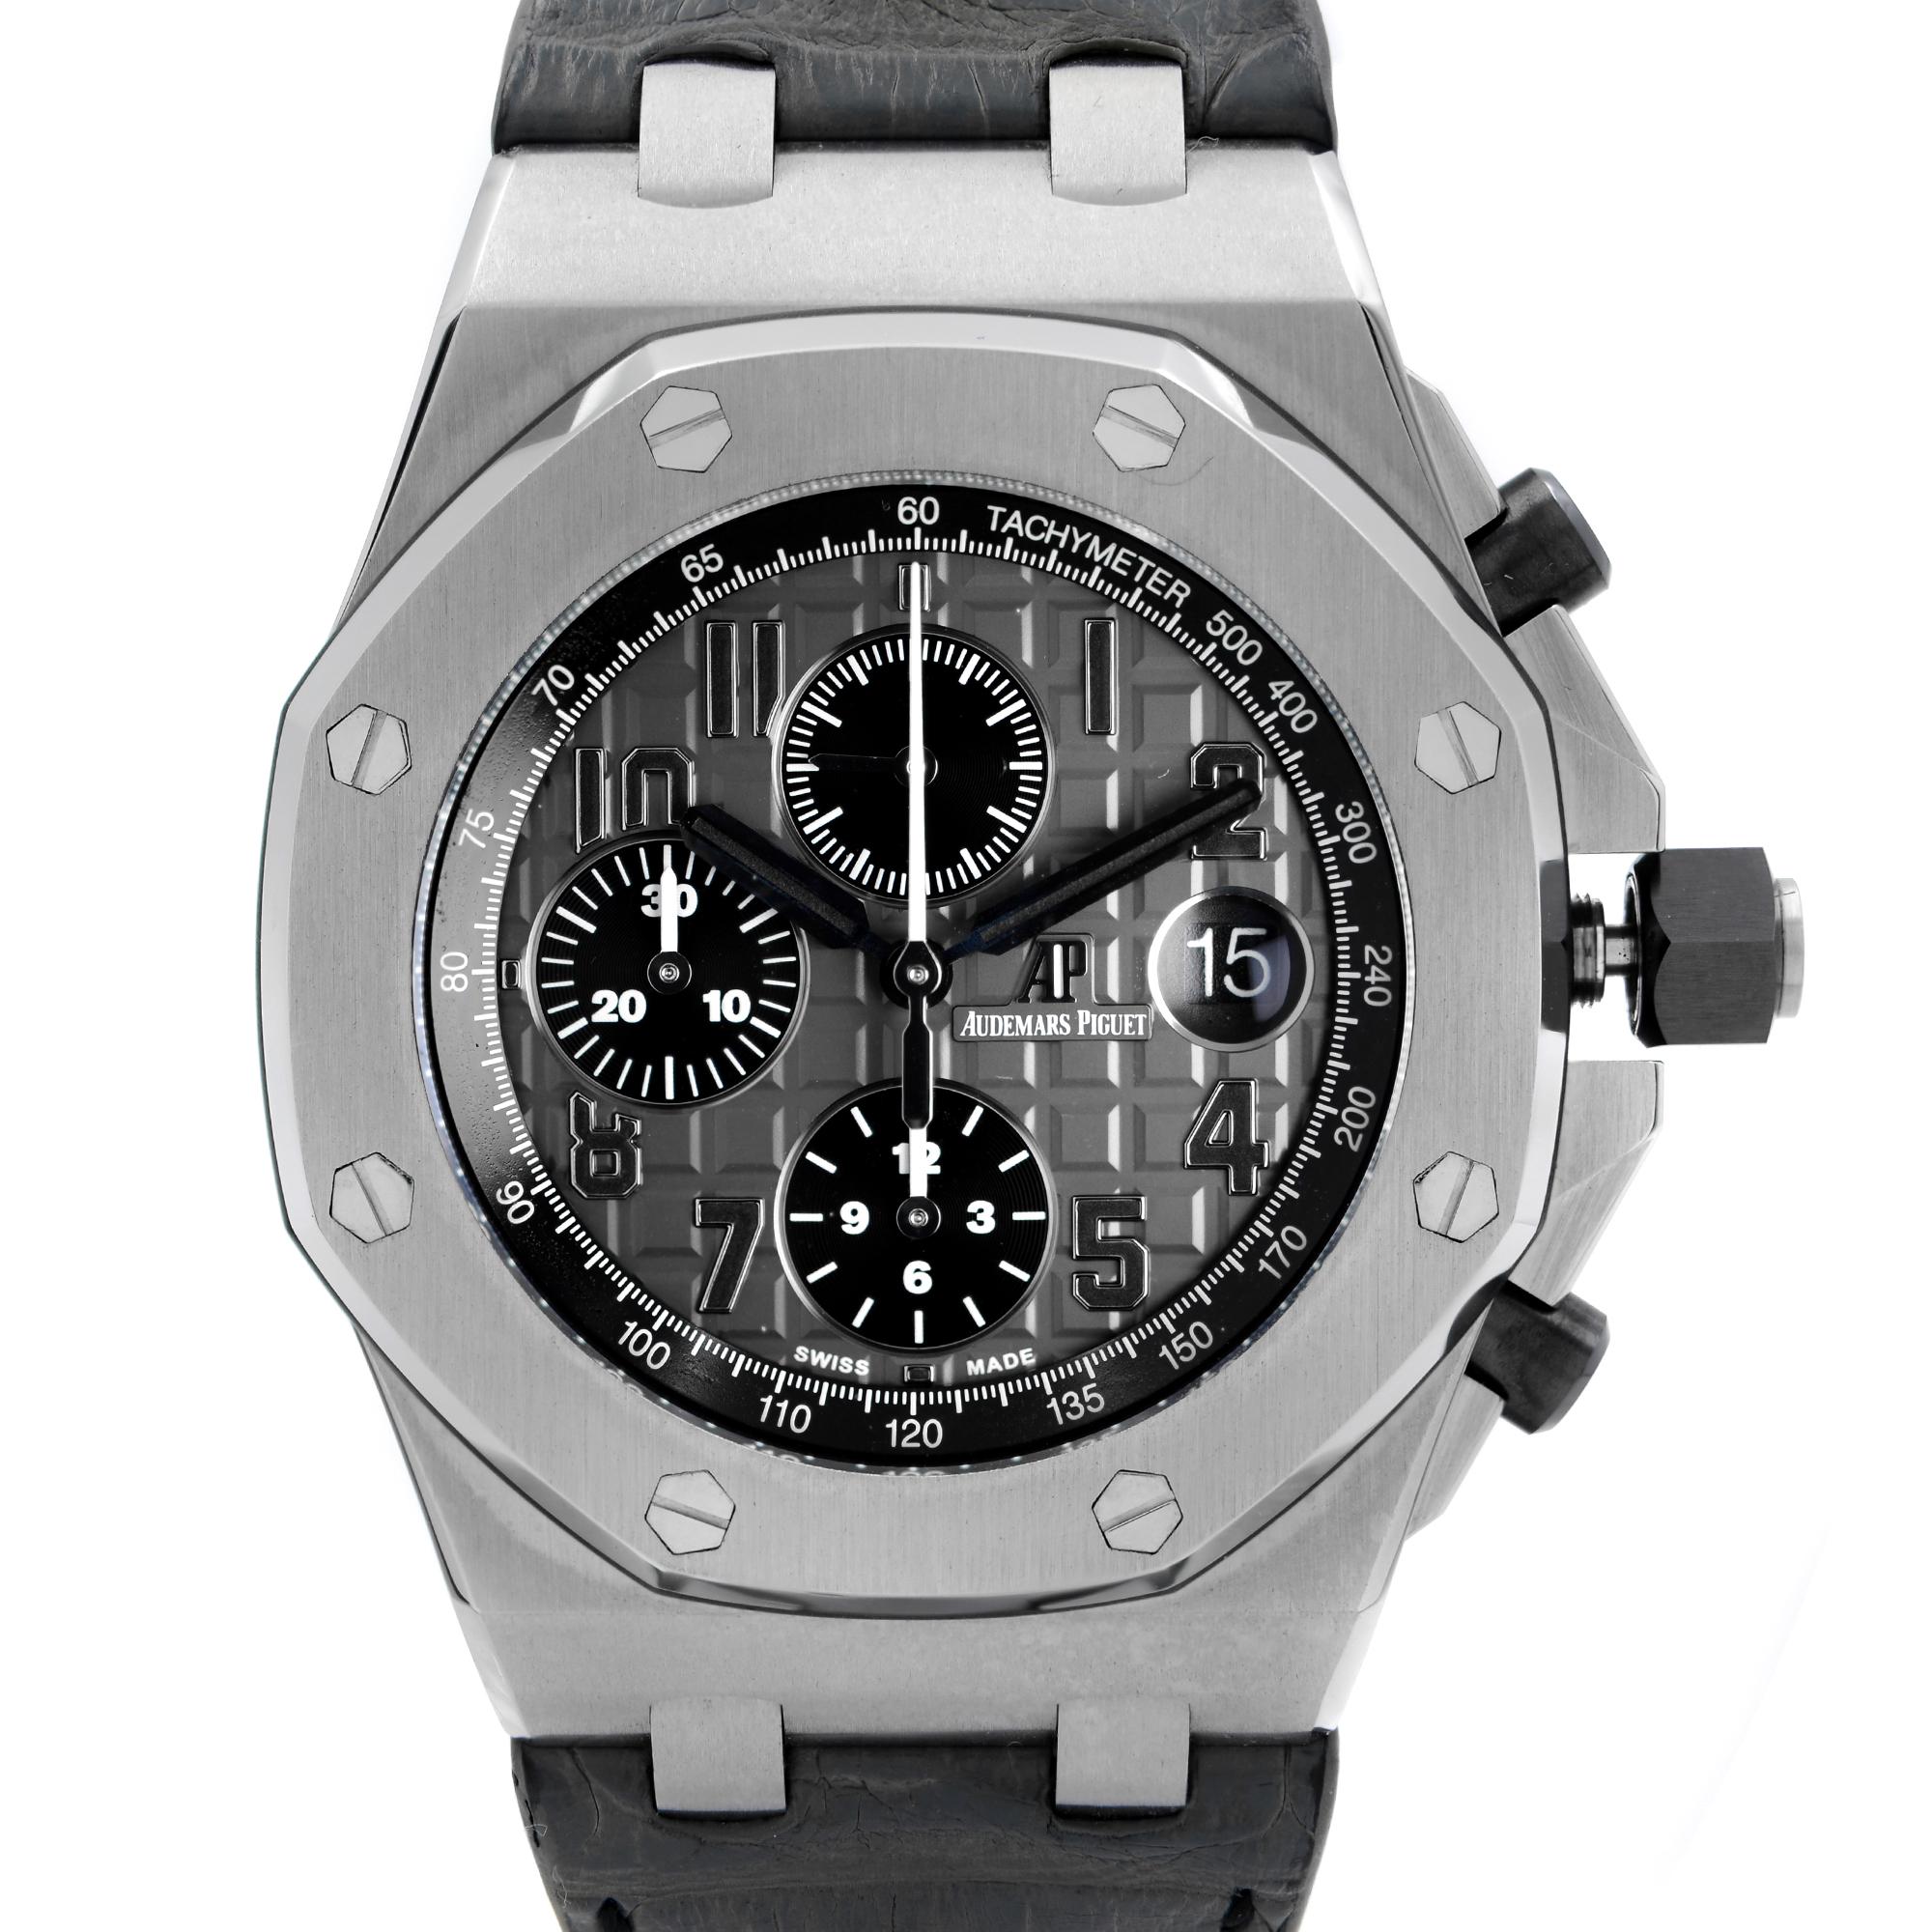 Pre Owned Audemars Piguet Royal Oak Offshore Elephant Steel Men's Automatic Watch 26470ST.OO.A104CR.01.  This Beautiful Timepiece is Powered by Mechanical (Automatic) Movement And Features: Stainless Steel Case with a Gray Leather Strap. Fixed